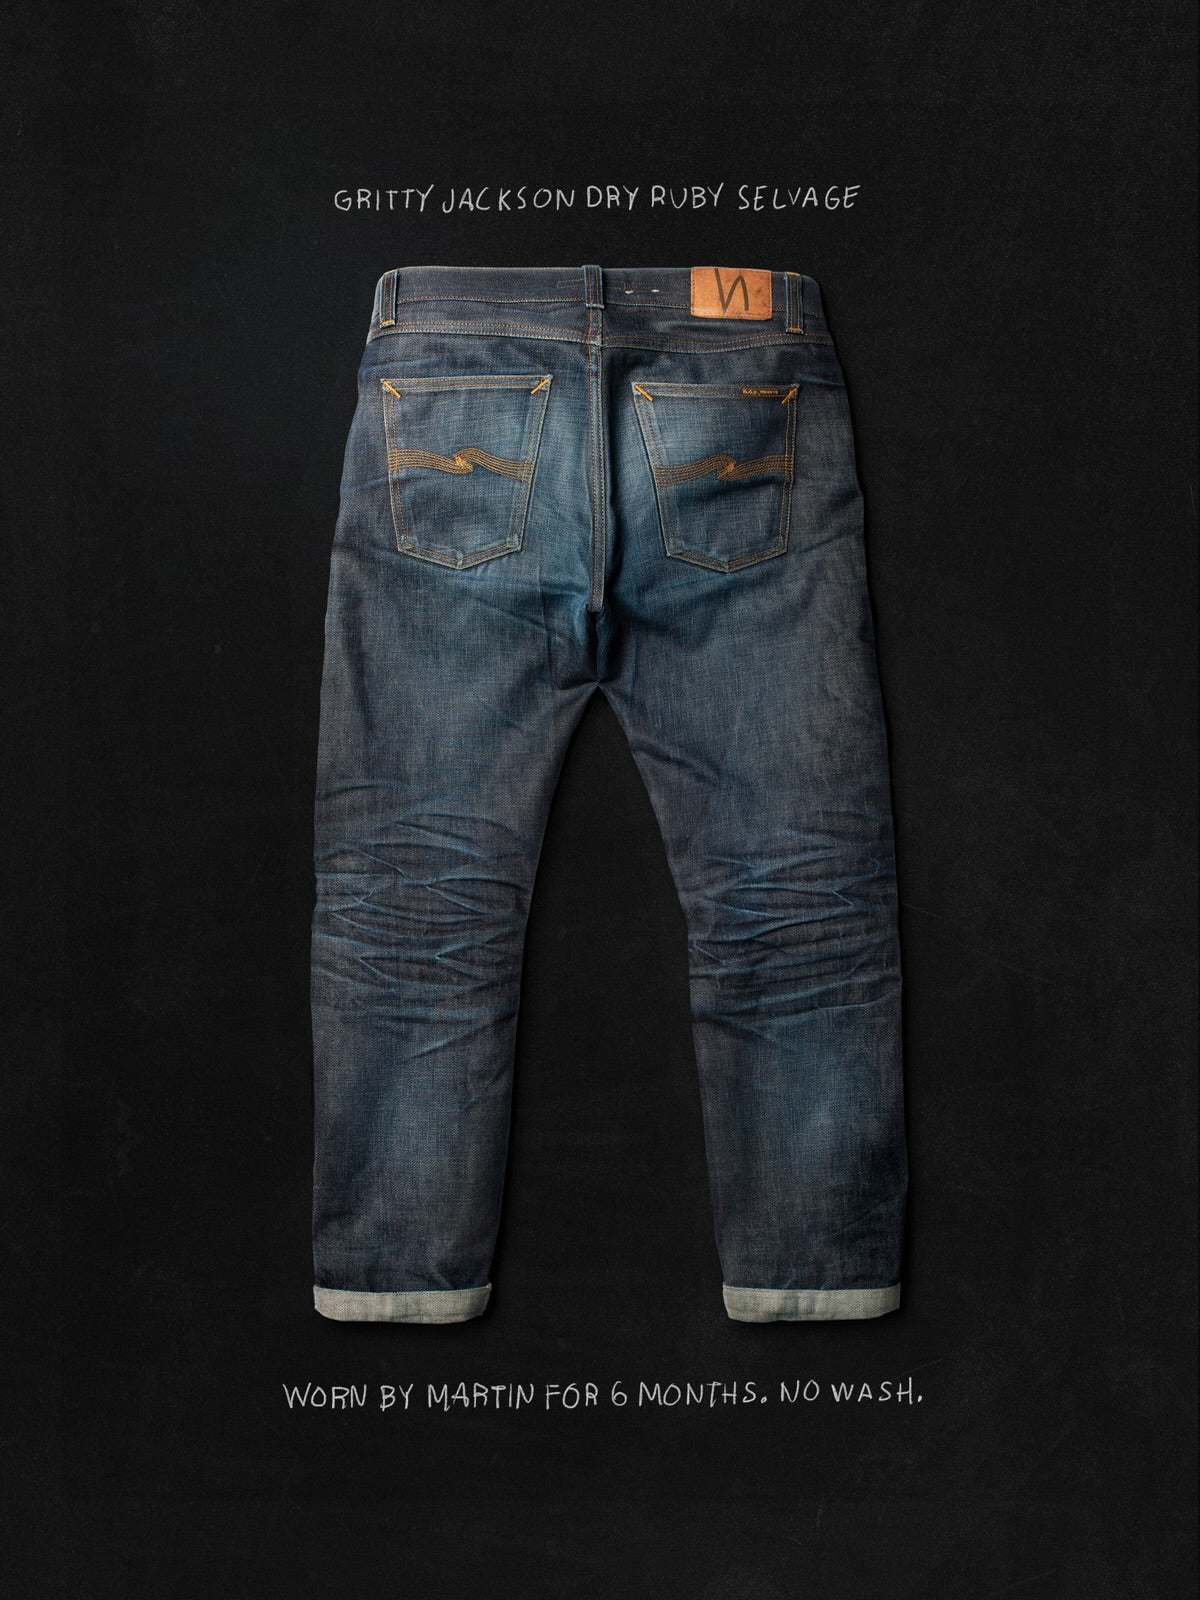 Gritty Jackson Dry Ruby Selvage